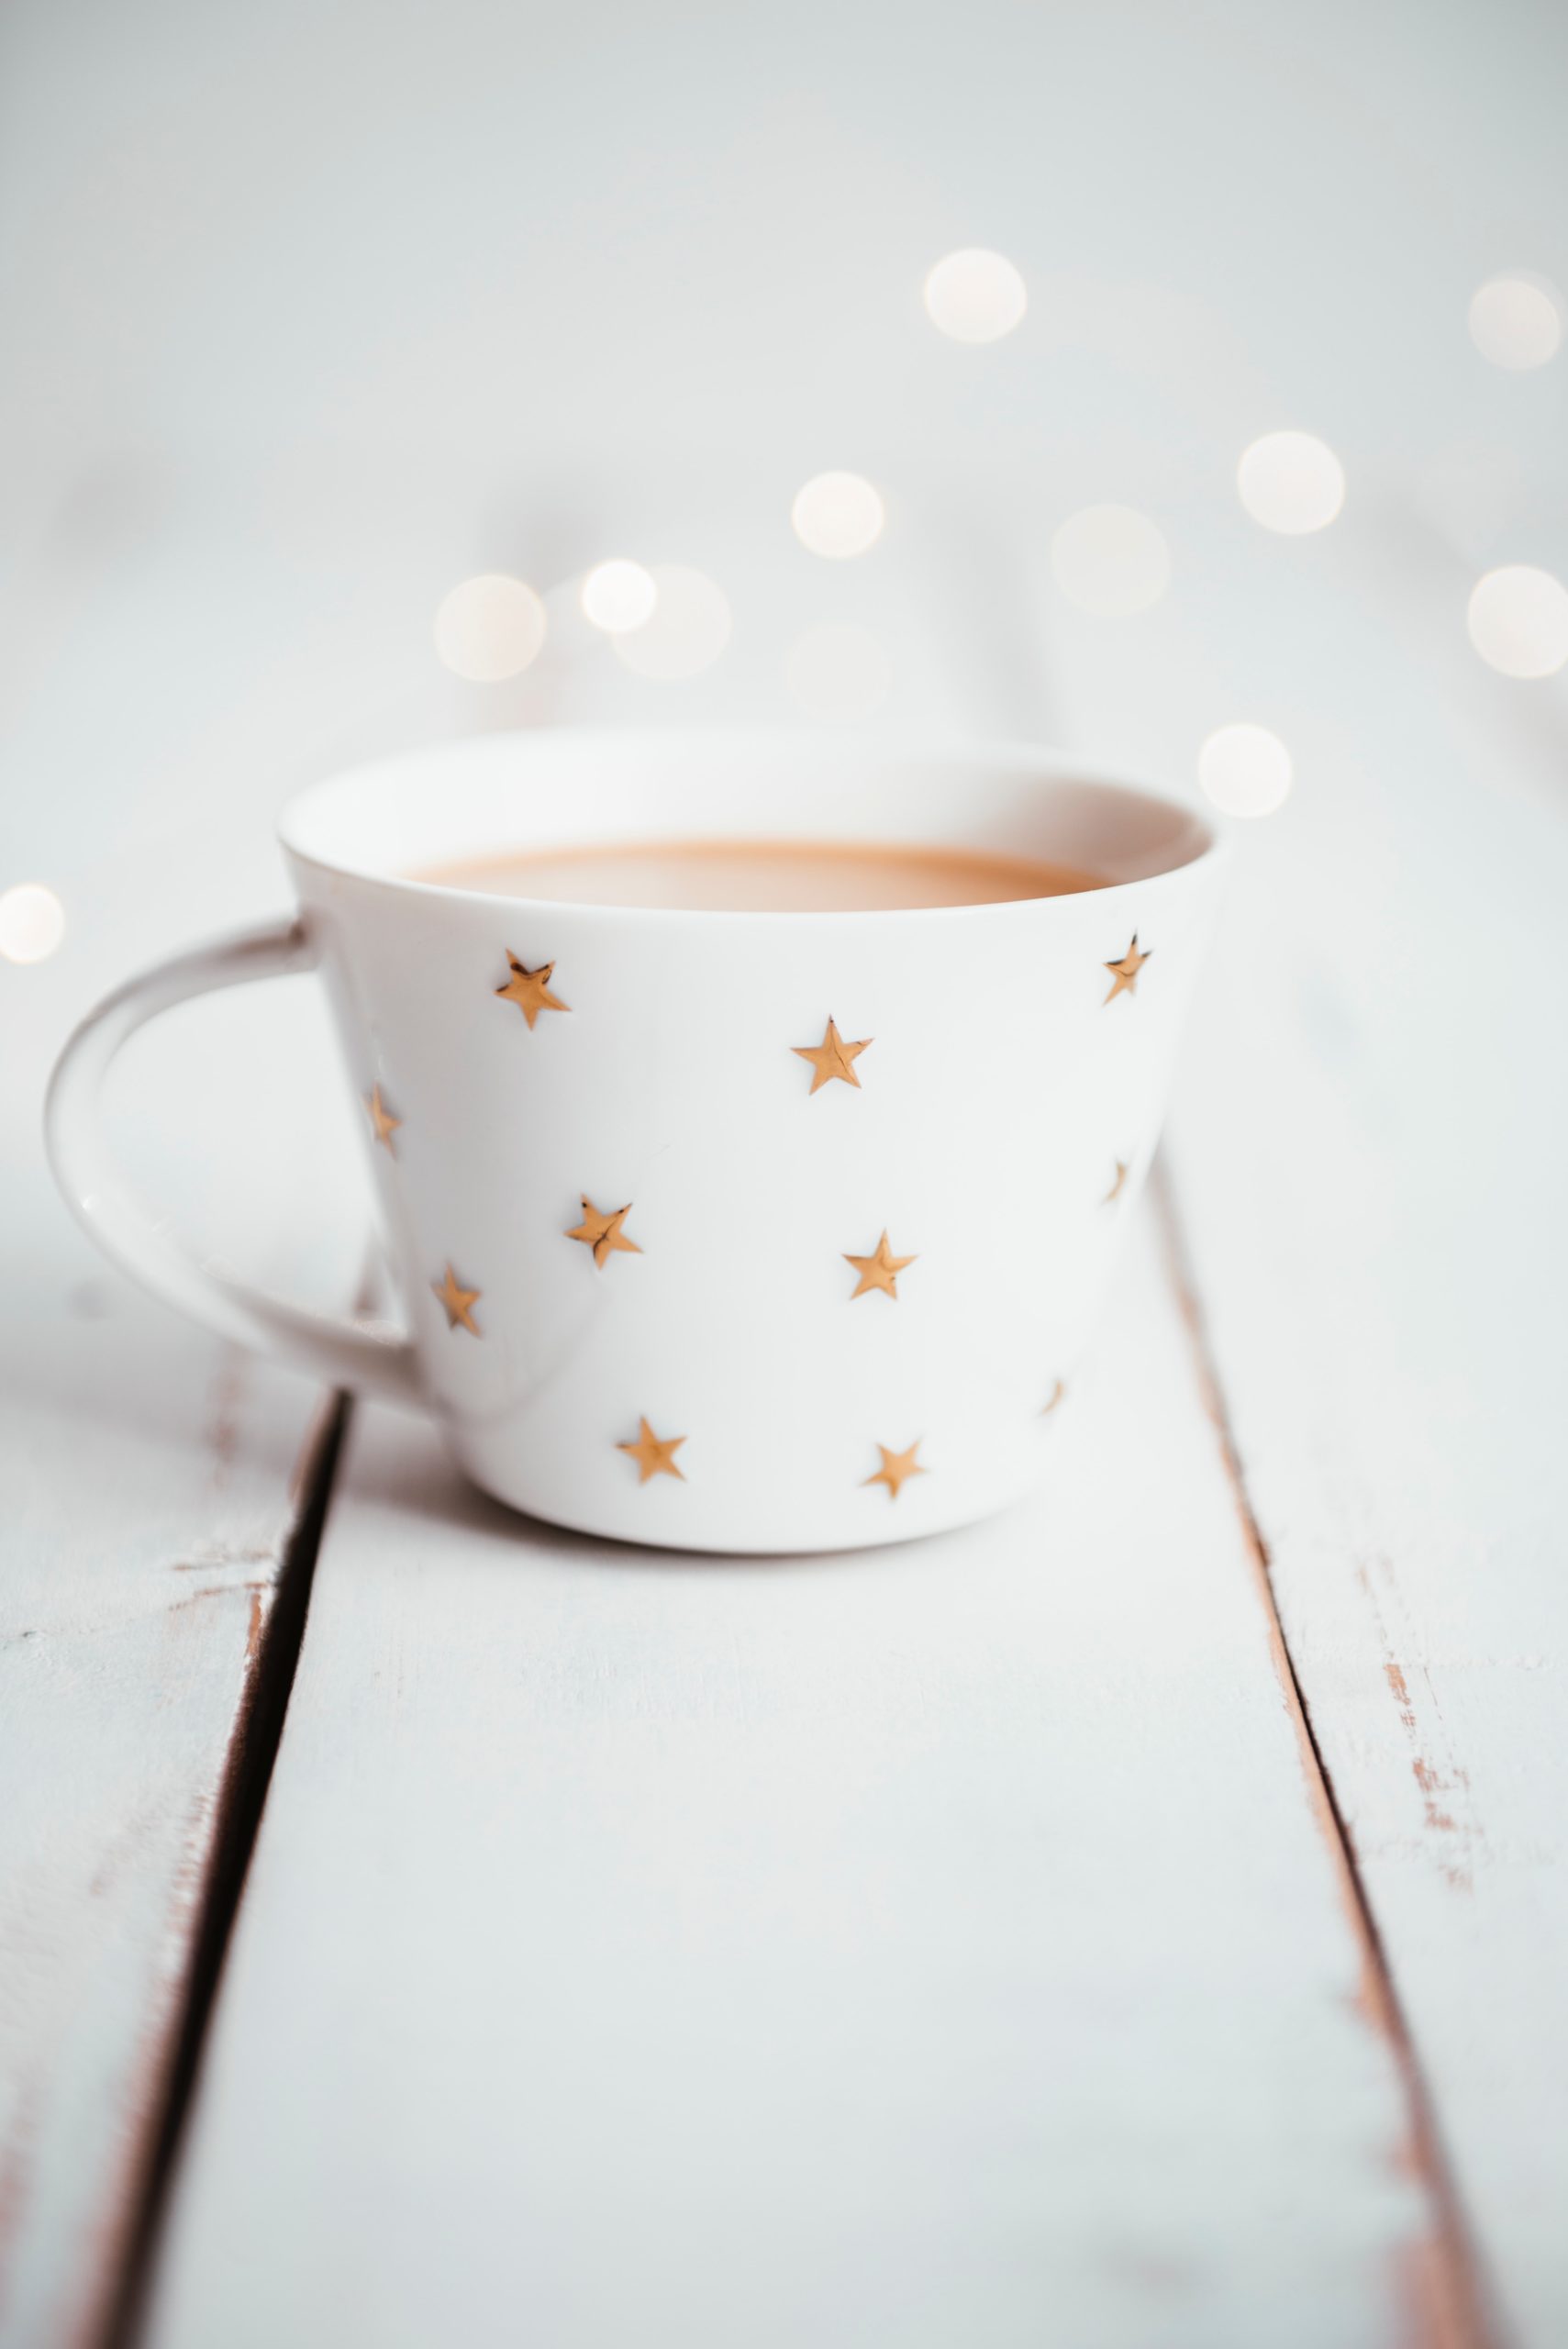 soothing cup of tea in star mug on white table